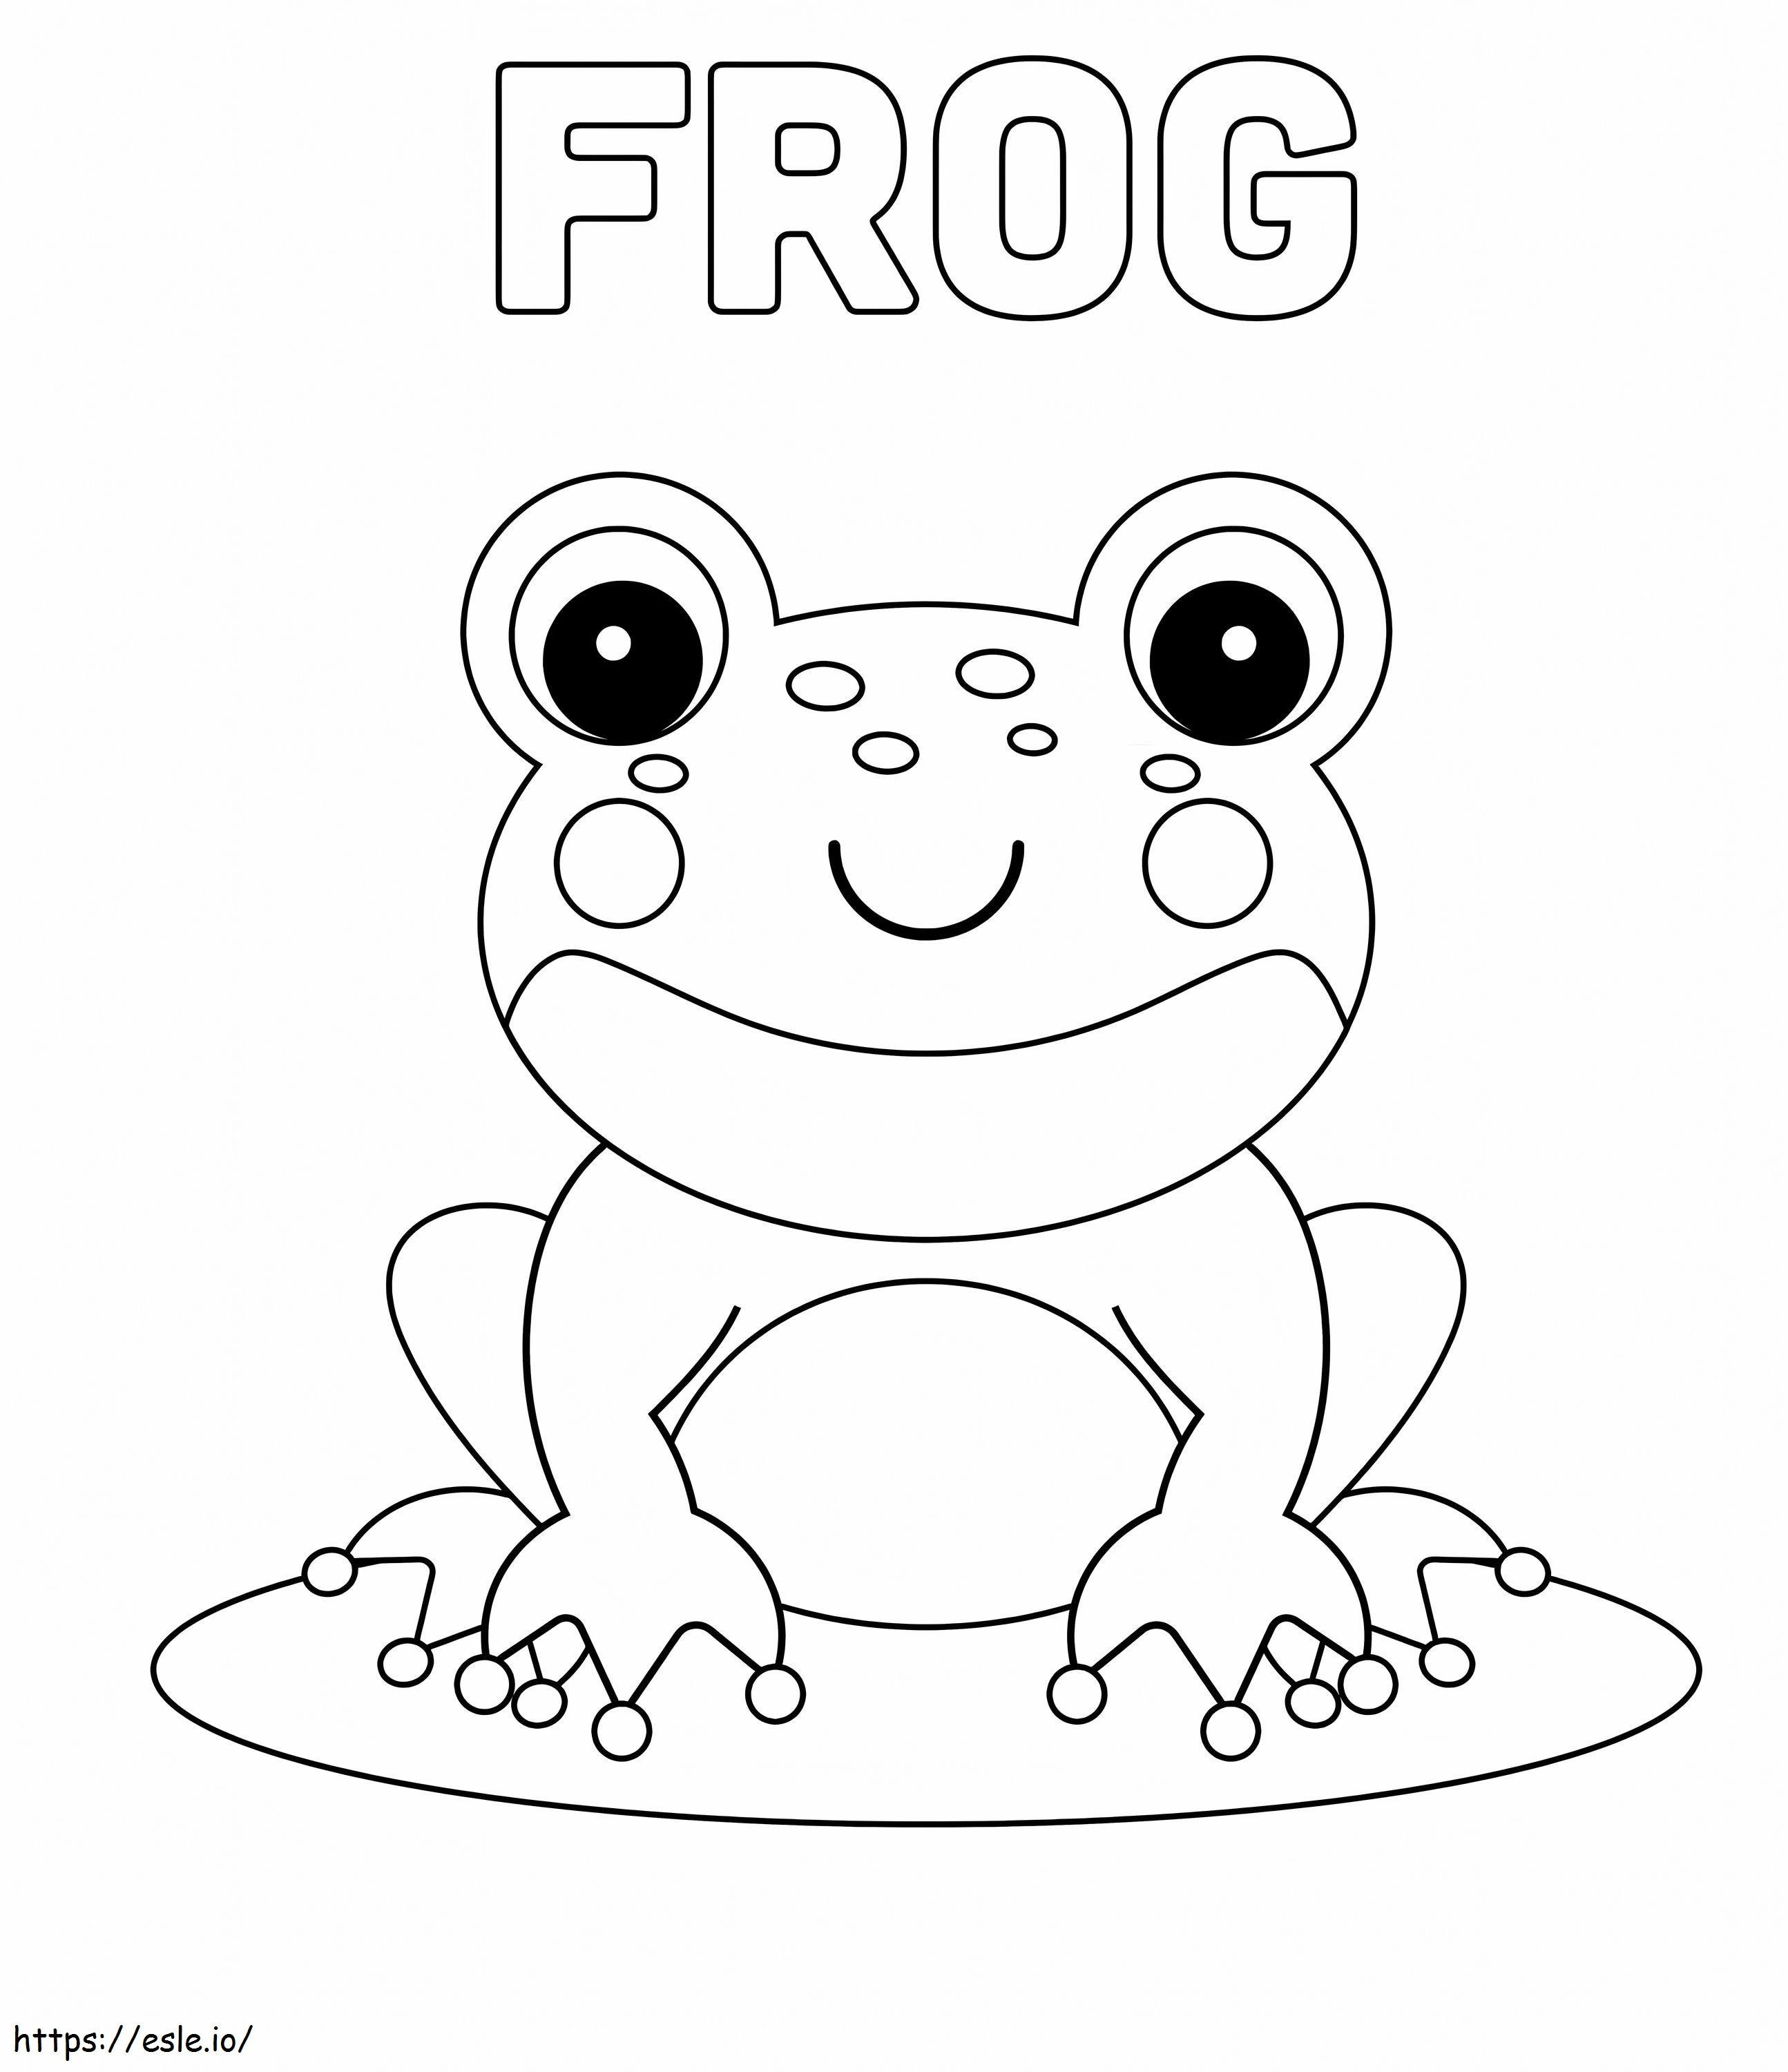 Smiling Baby Frog coloring page